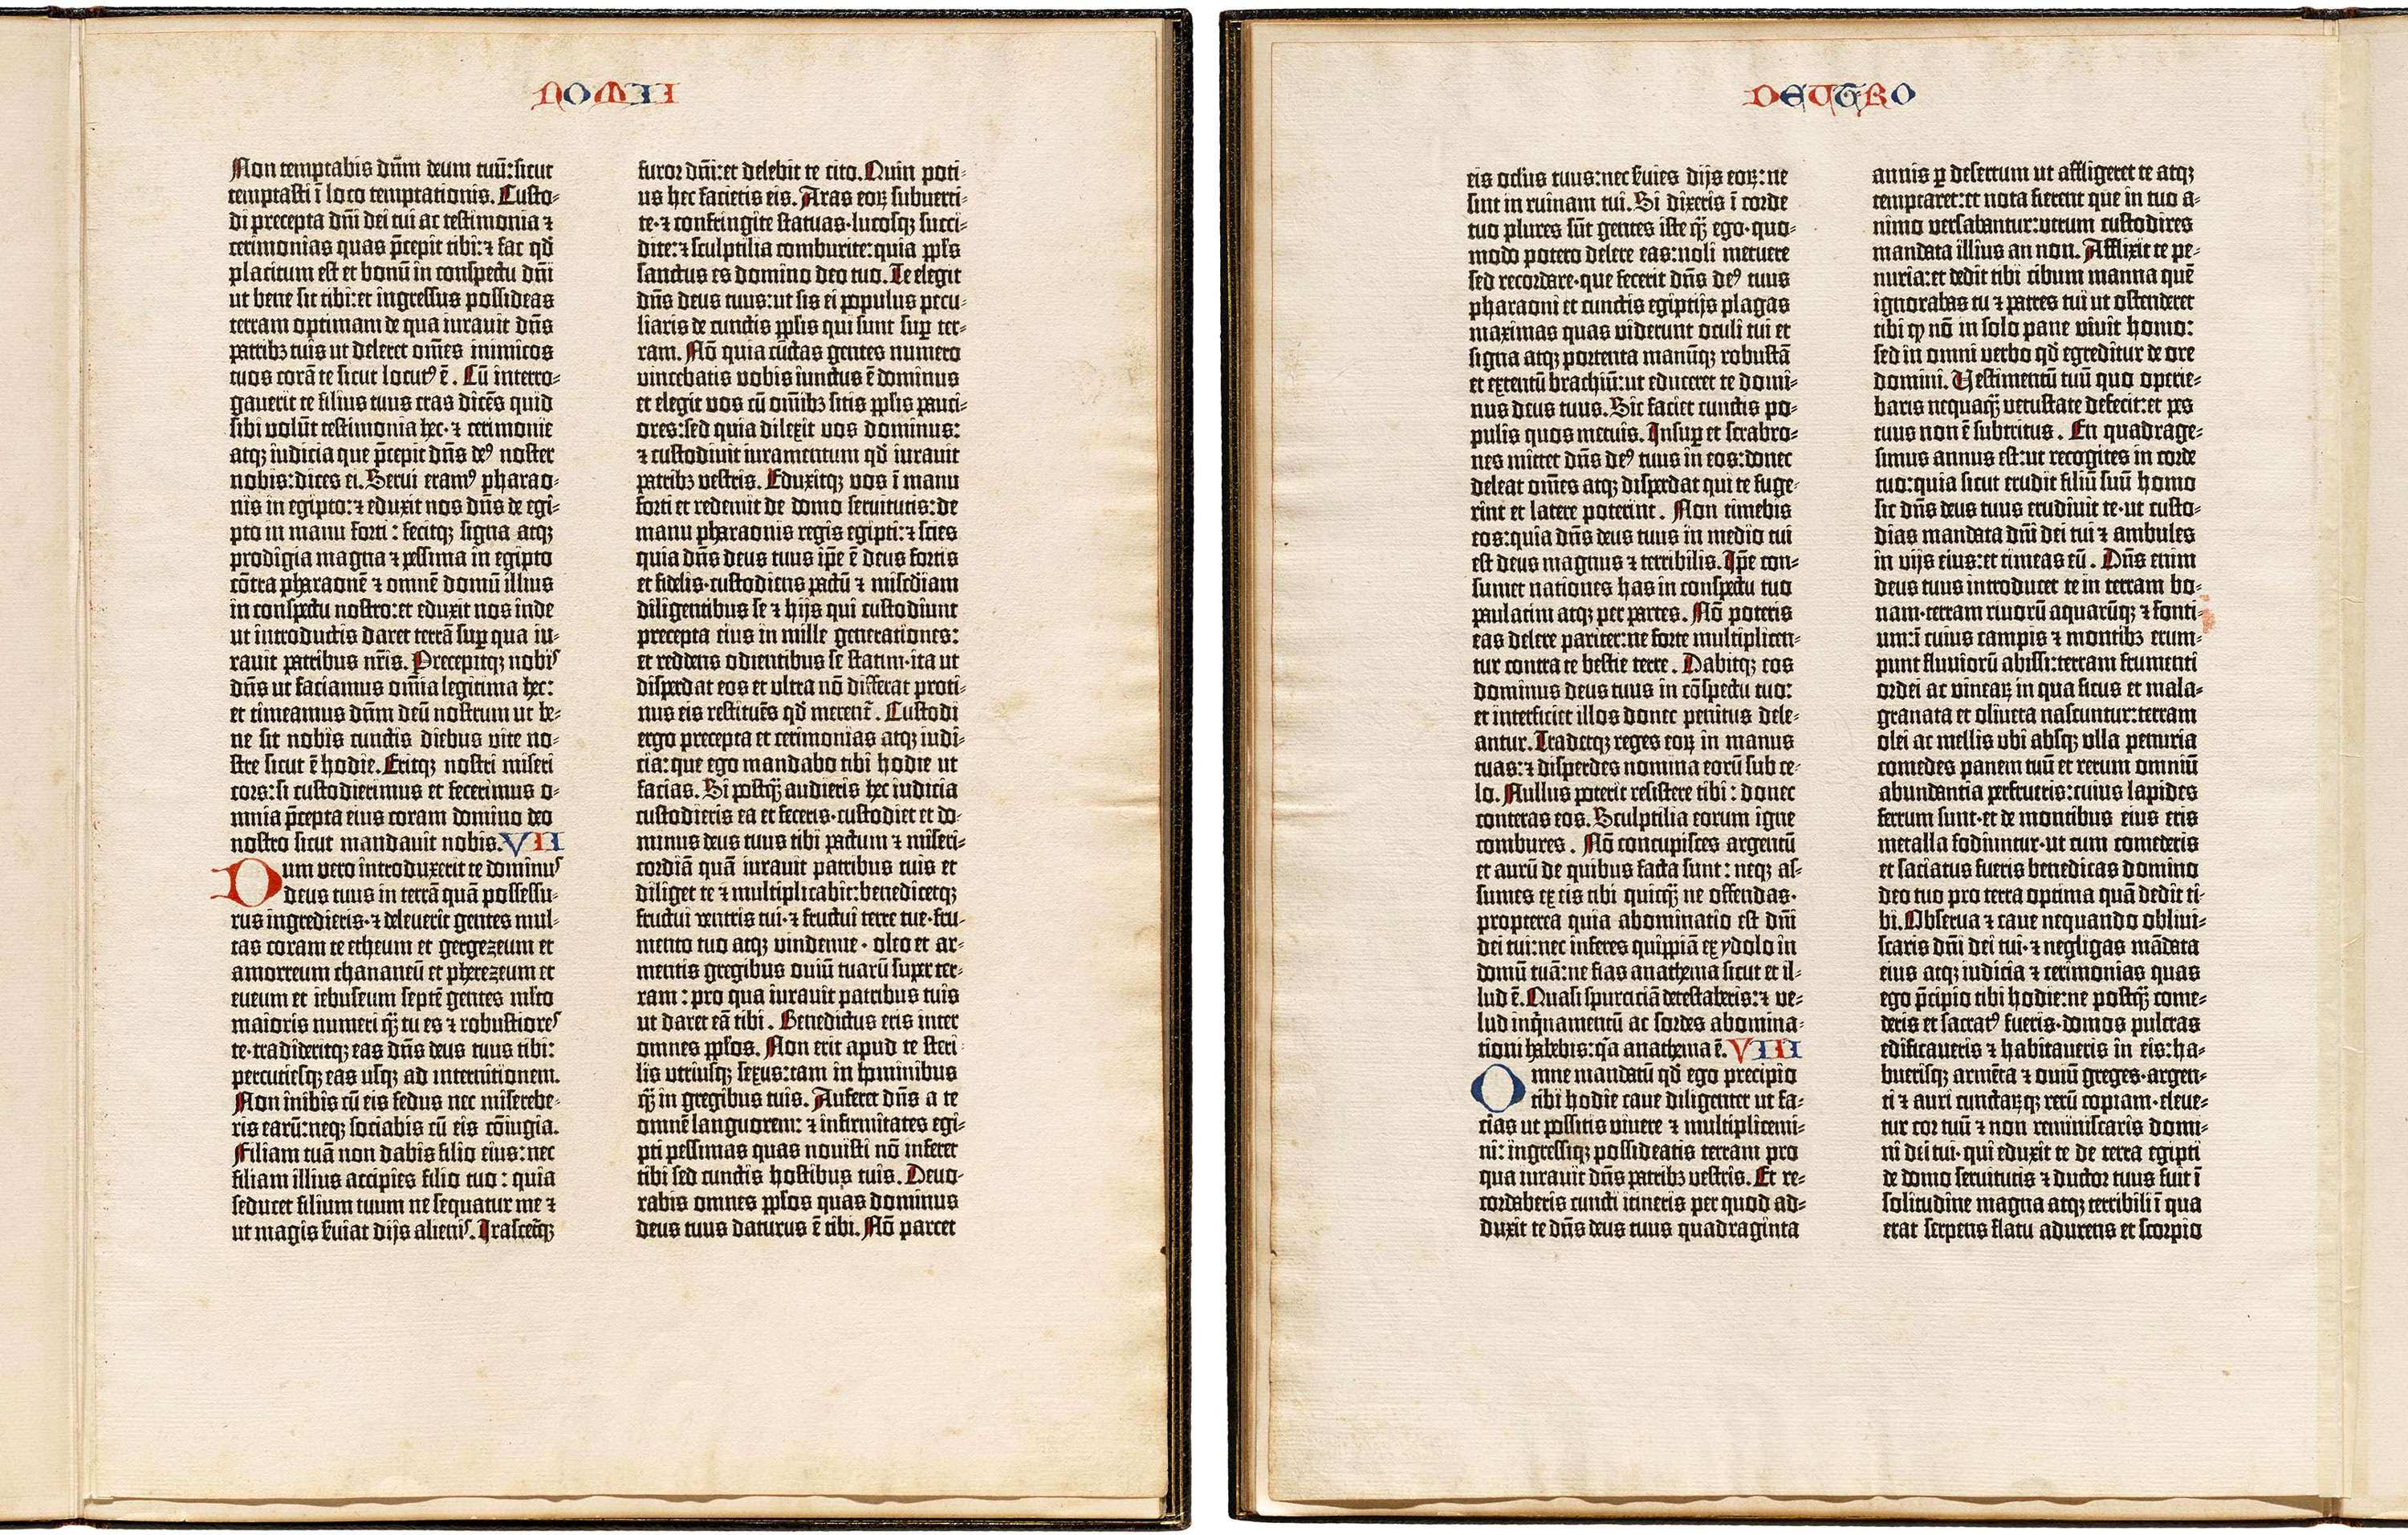 Johannes Gutenberg, two sides of a leaf from his Bible